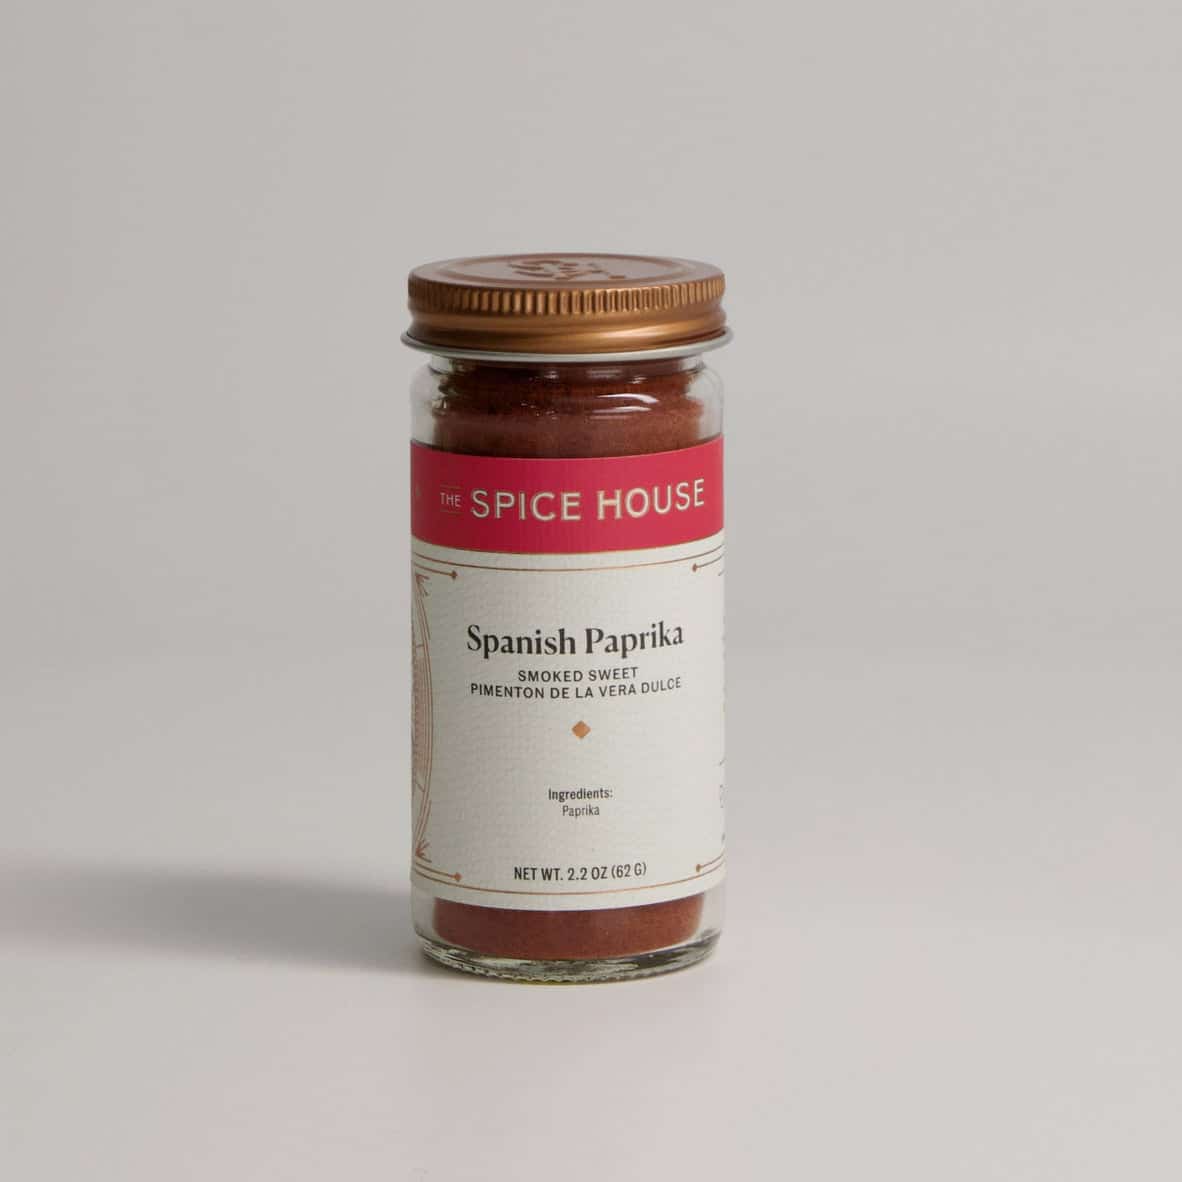 Jar of Smoked Paprika from The Spice House.